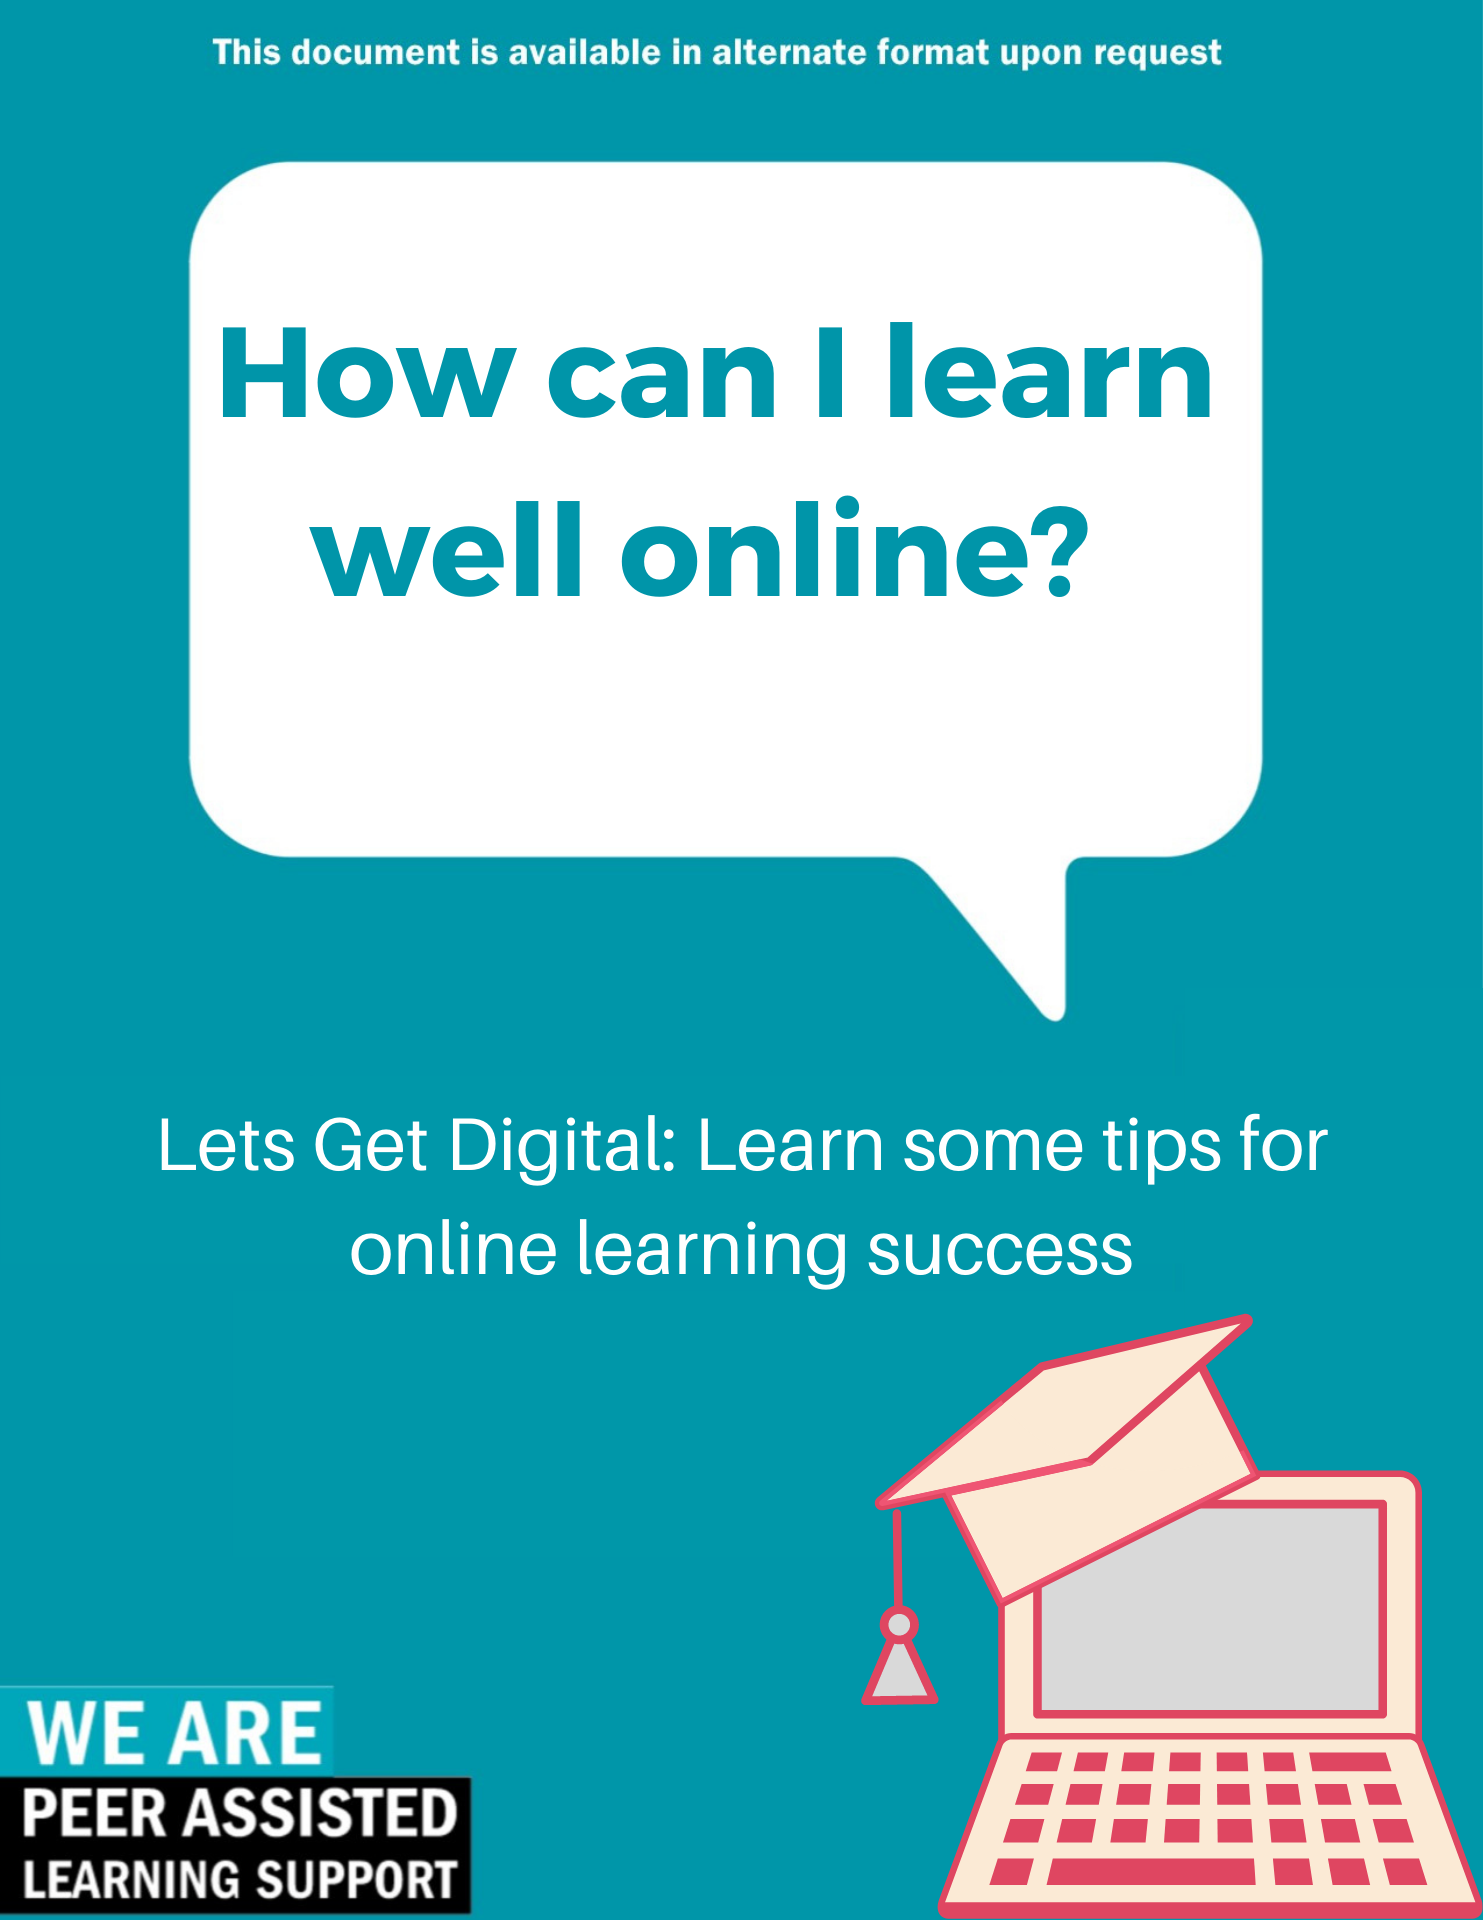 An image of a laptop with a graduation cap on it on a bright blue background. Background text says “How can I learn well online?